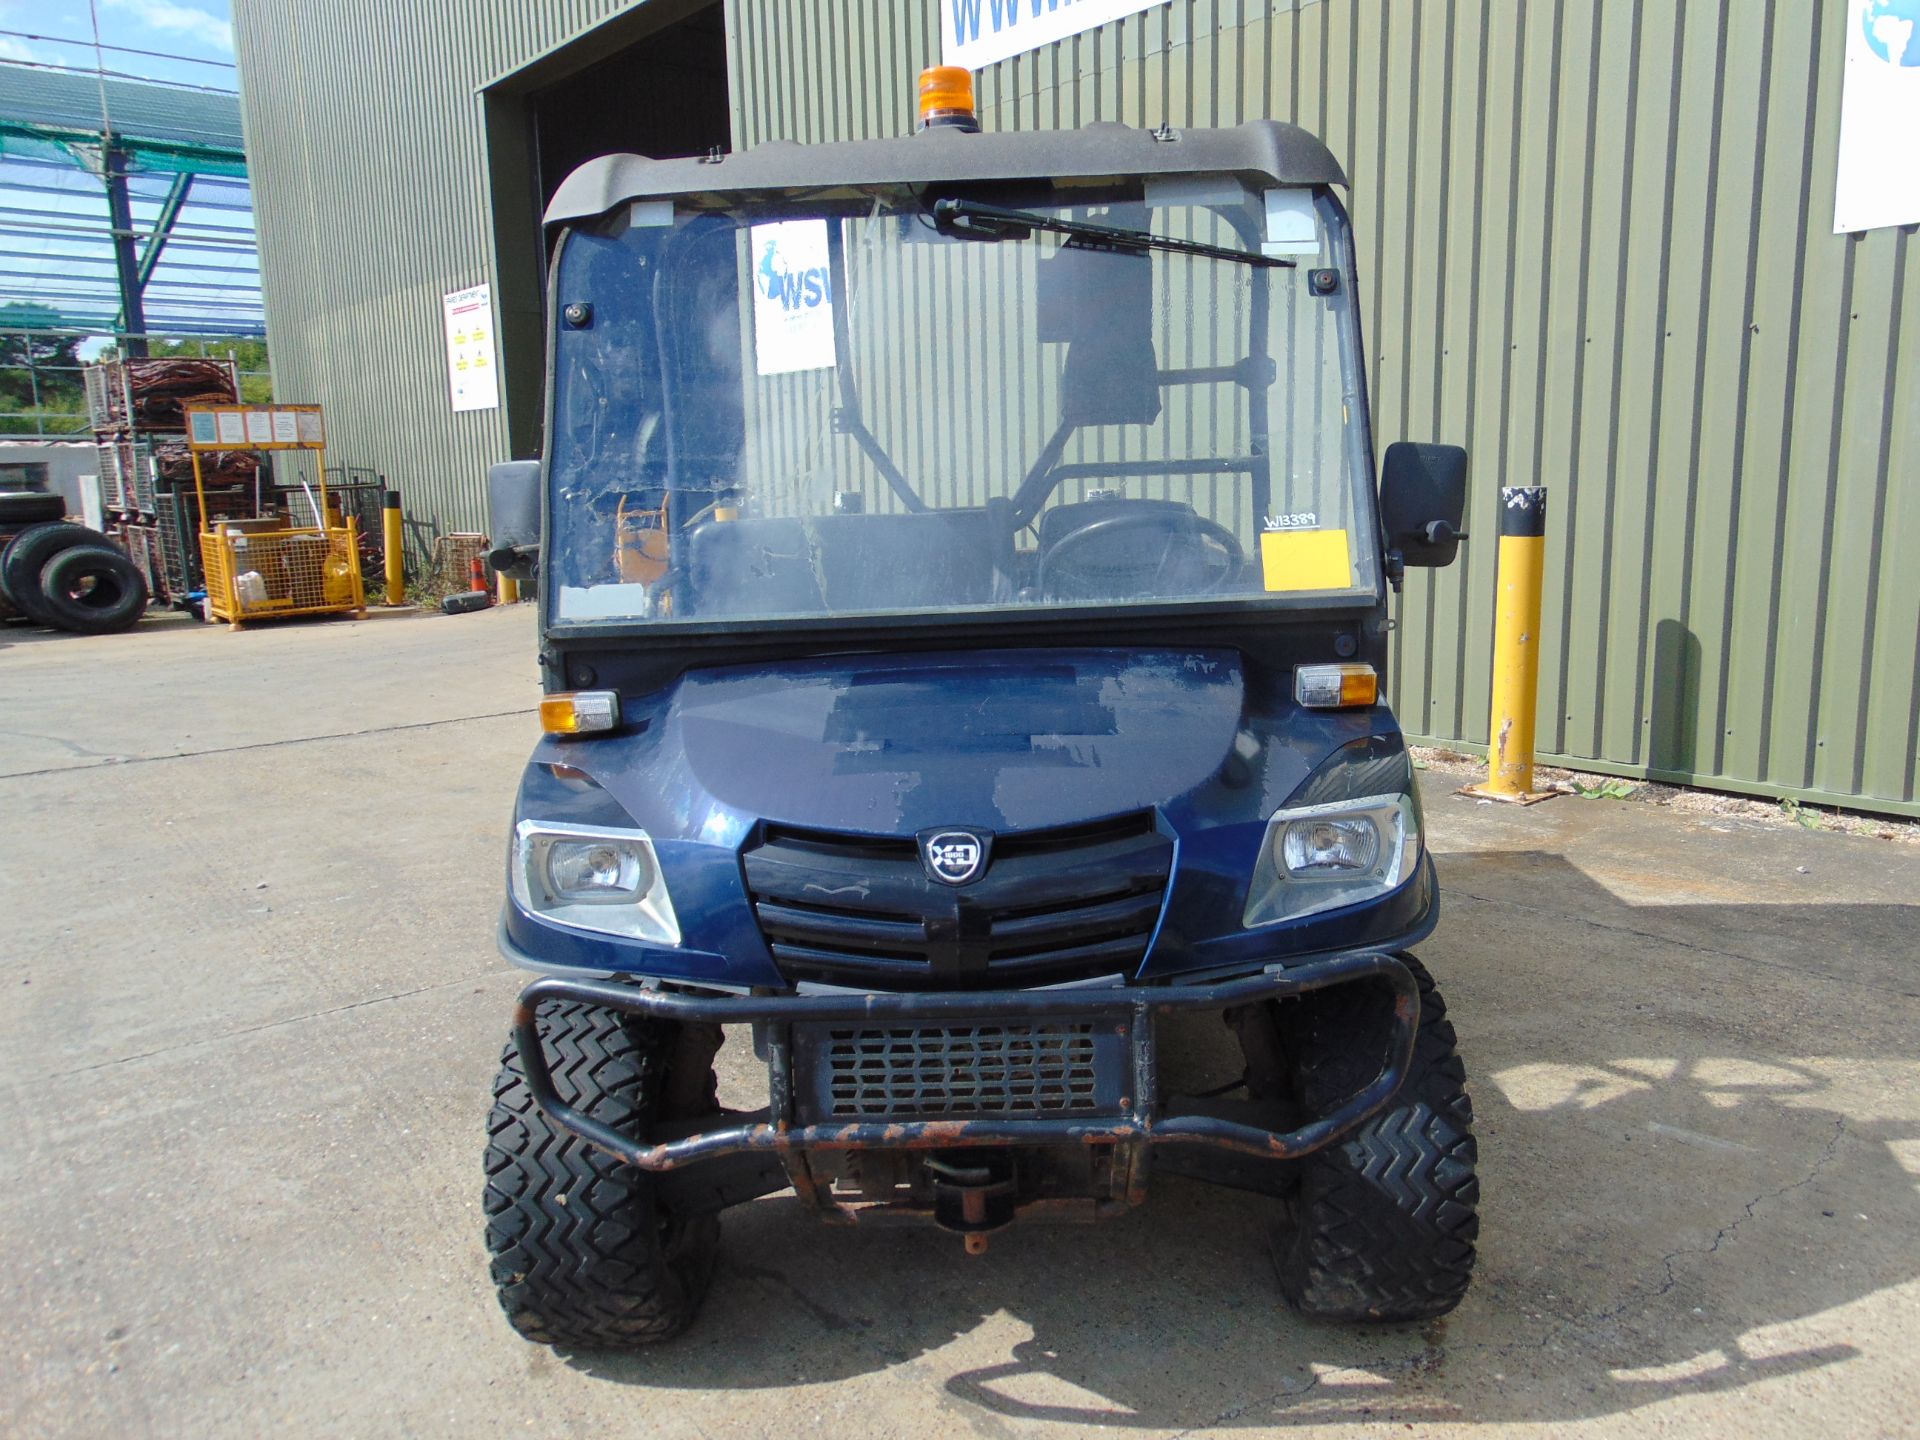 2014 Cushman XD1600 4x4 Diesel Utility Vehicle Showing 1198 hrs - Image 3 of 18